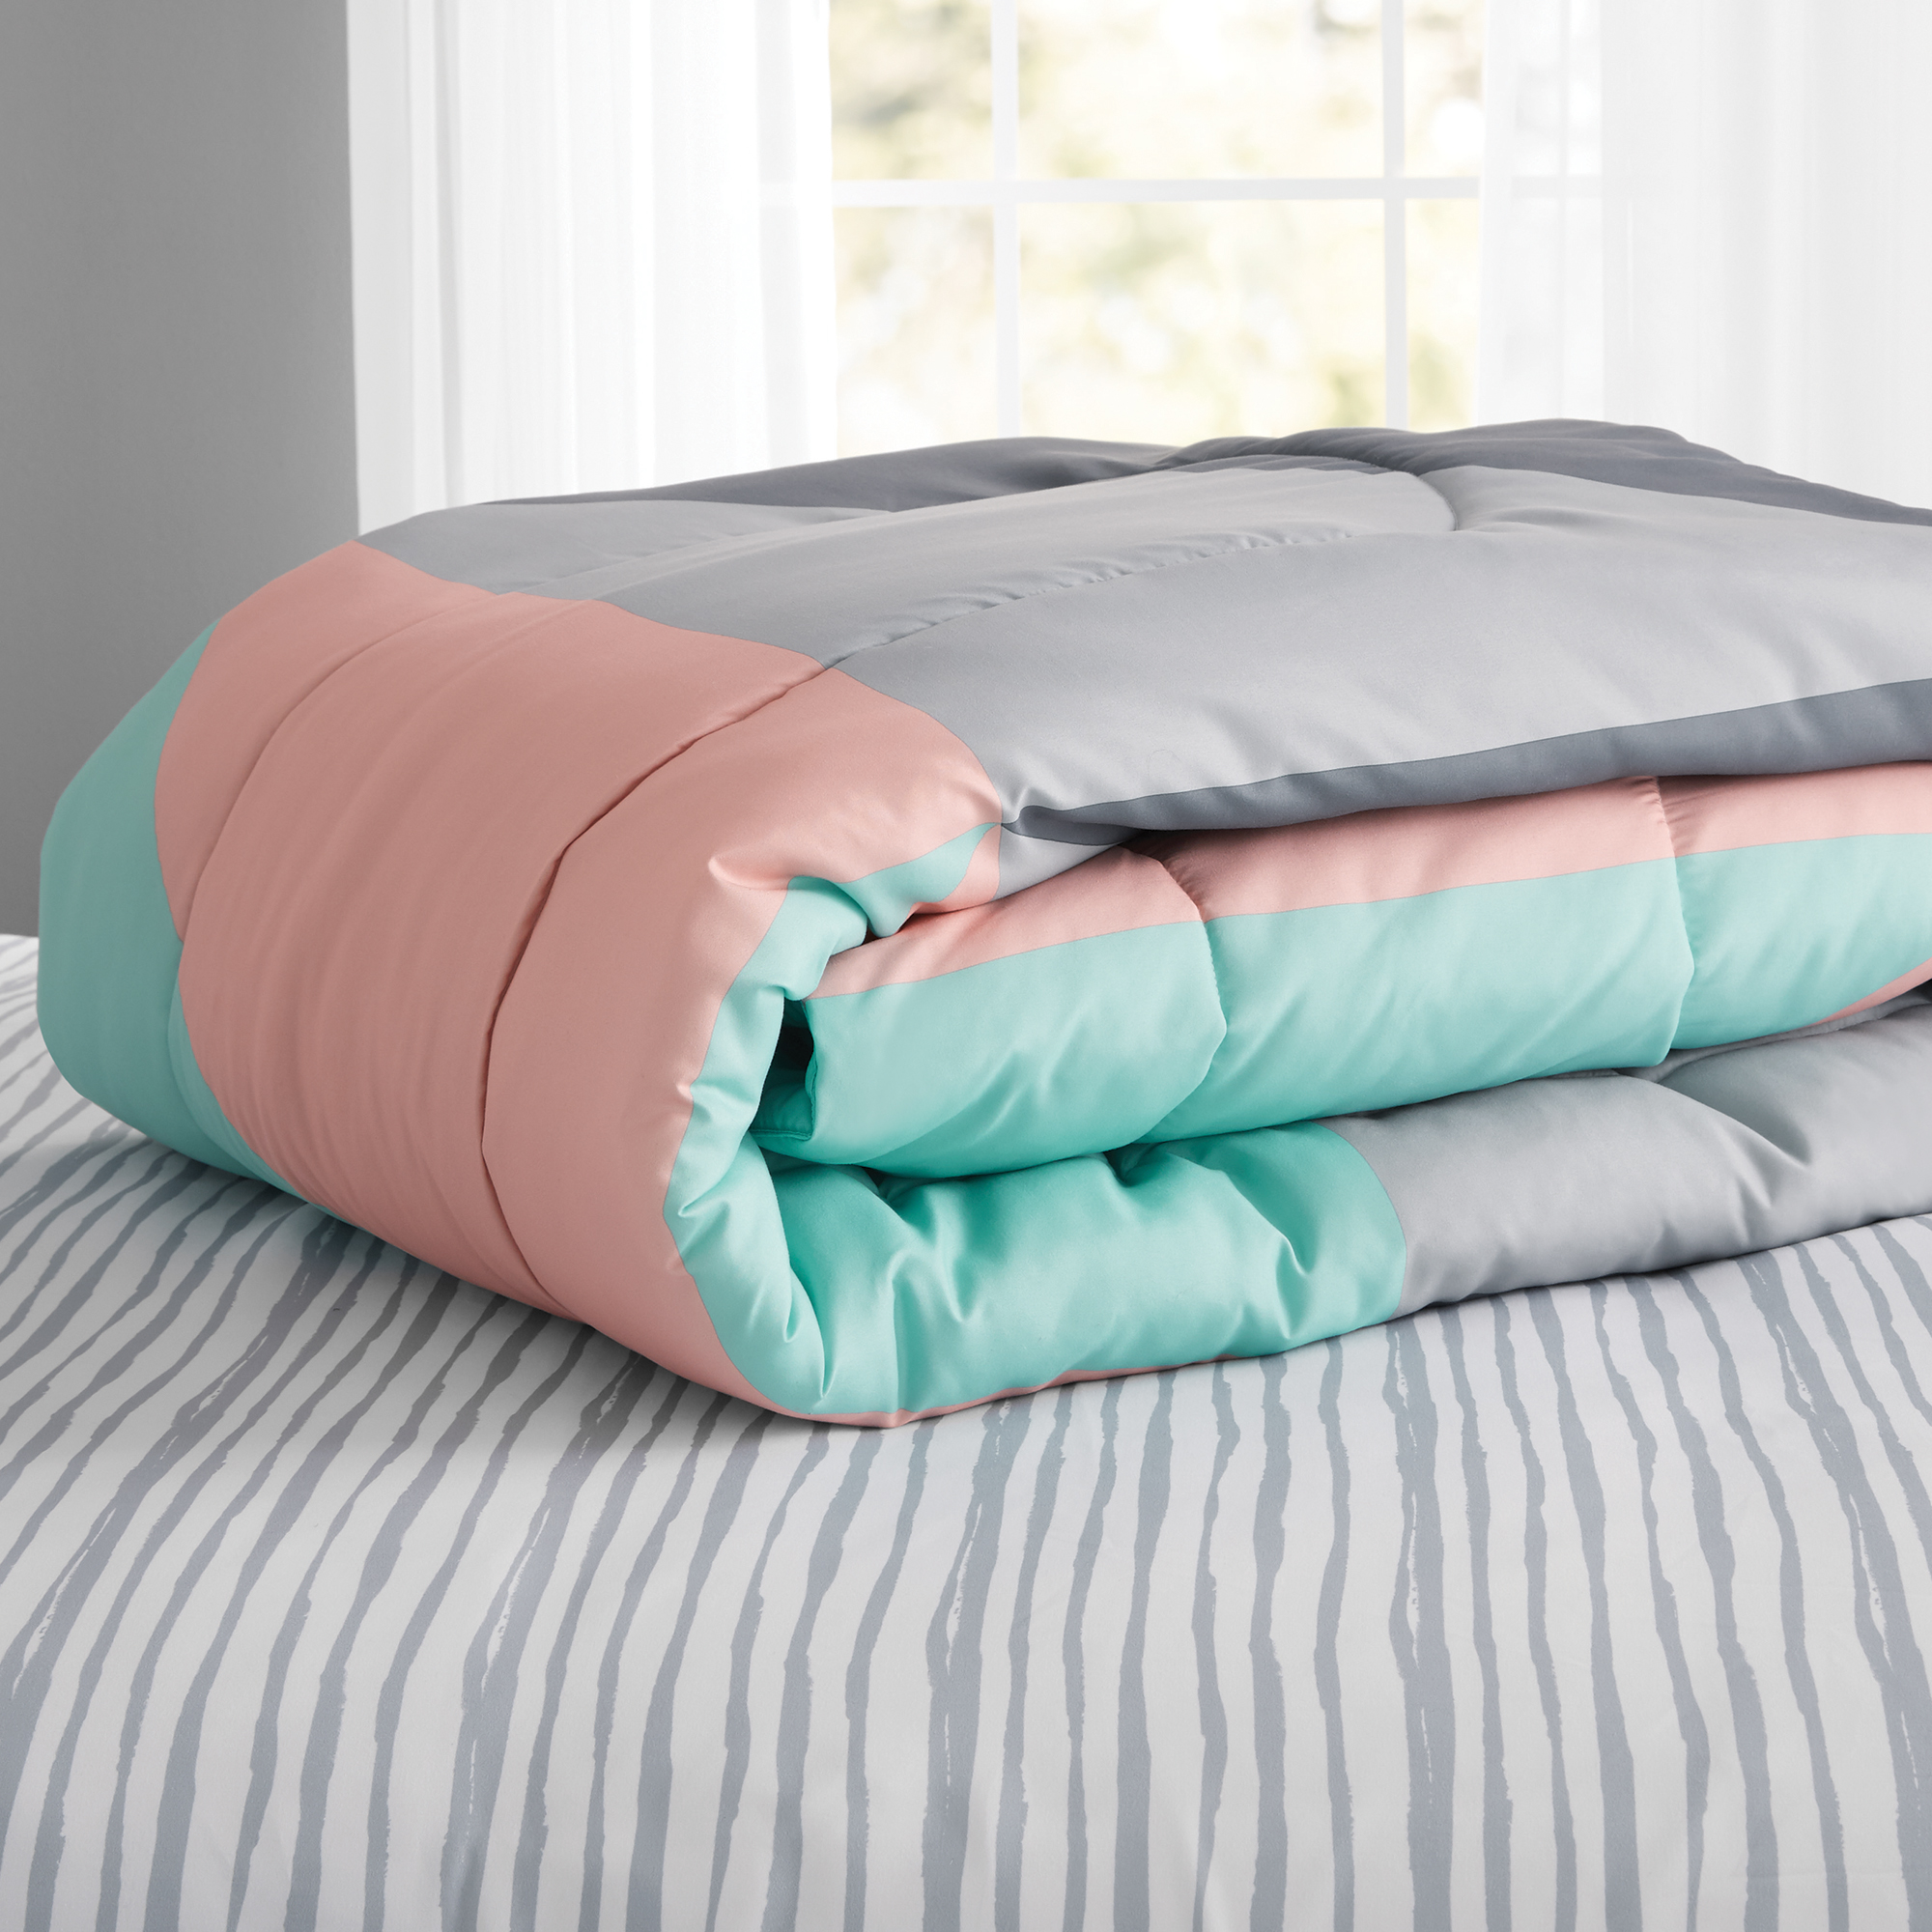 Mainstays Gray and Teal Geometric 8 Piece Bed in a Bag Comforter Set With Sheets, Queen - image 3 of 8